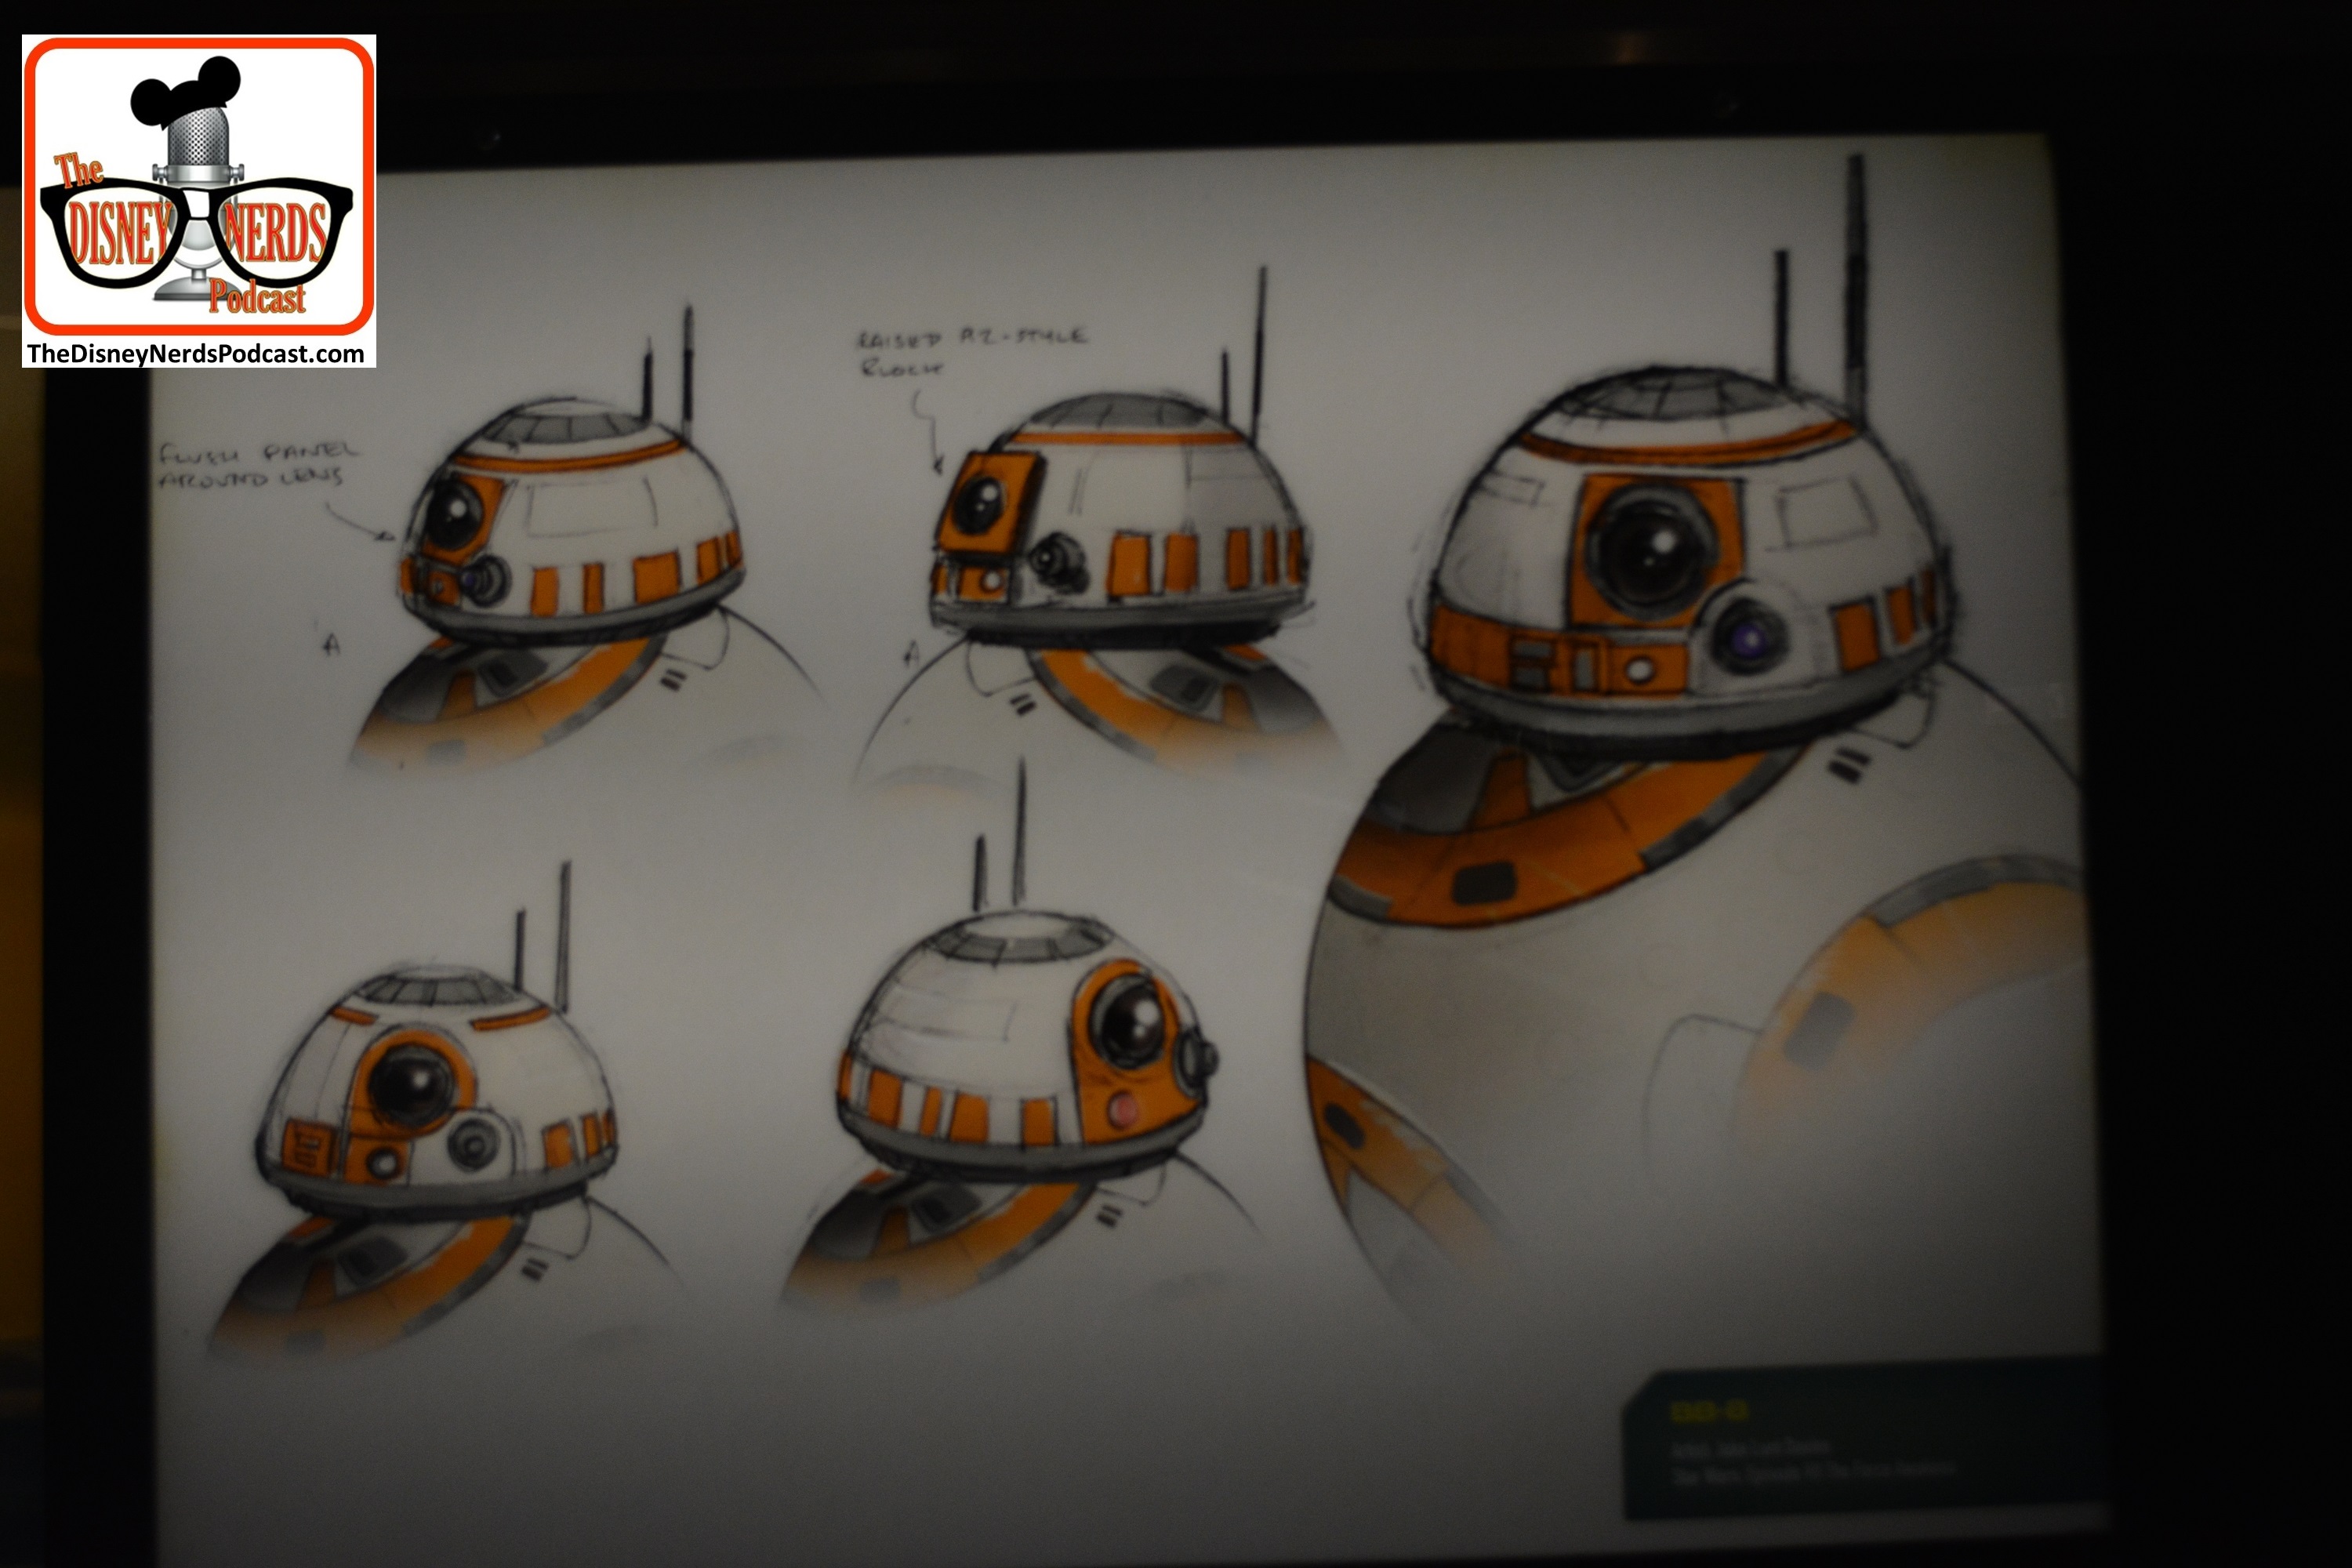 2015-12 - Hollywood Studios -Star Wars Posters cover the queue - the posters cover everything in the star wars universe. - BB8